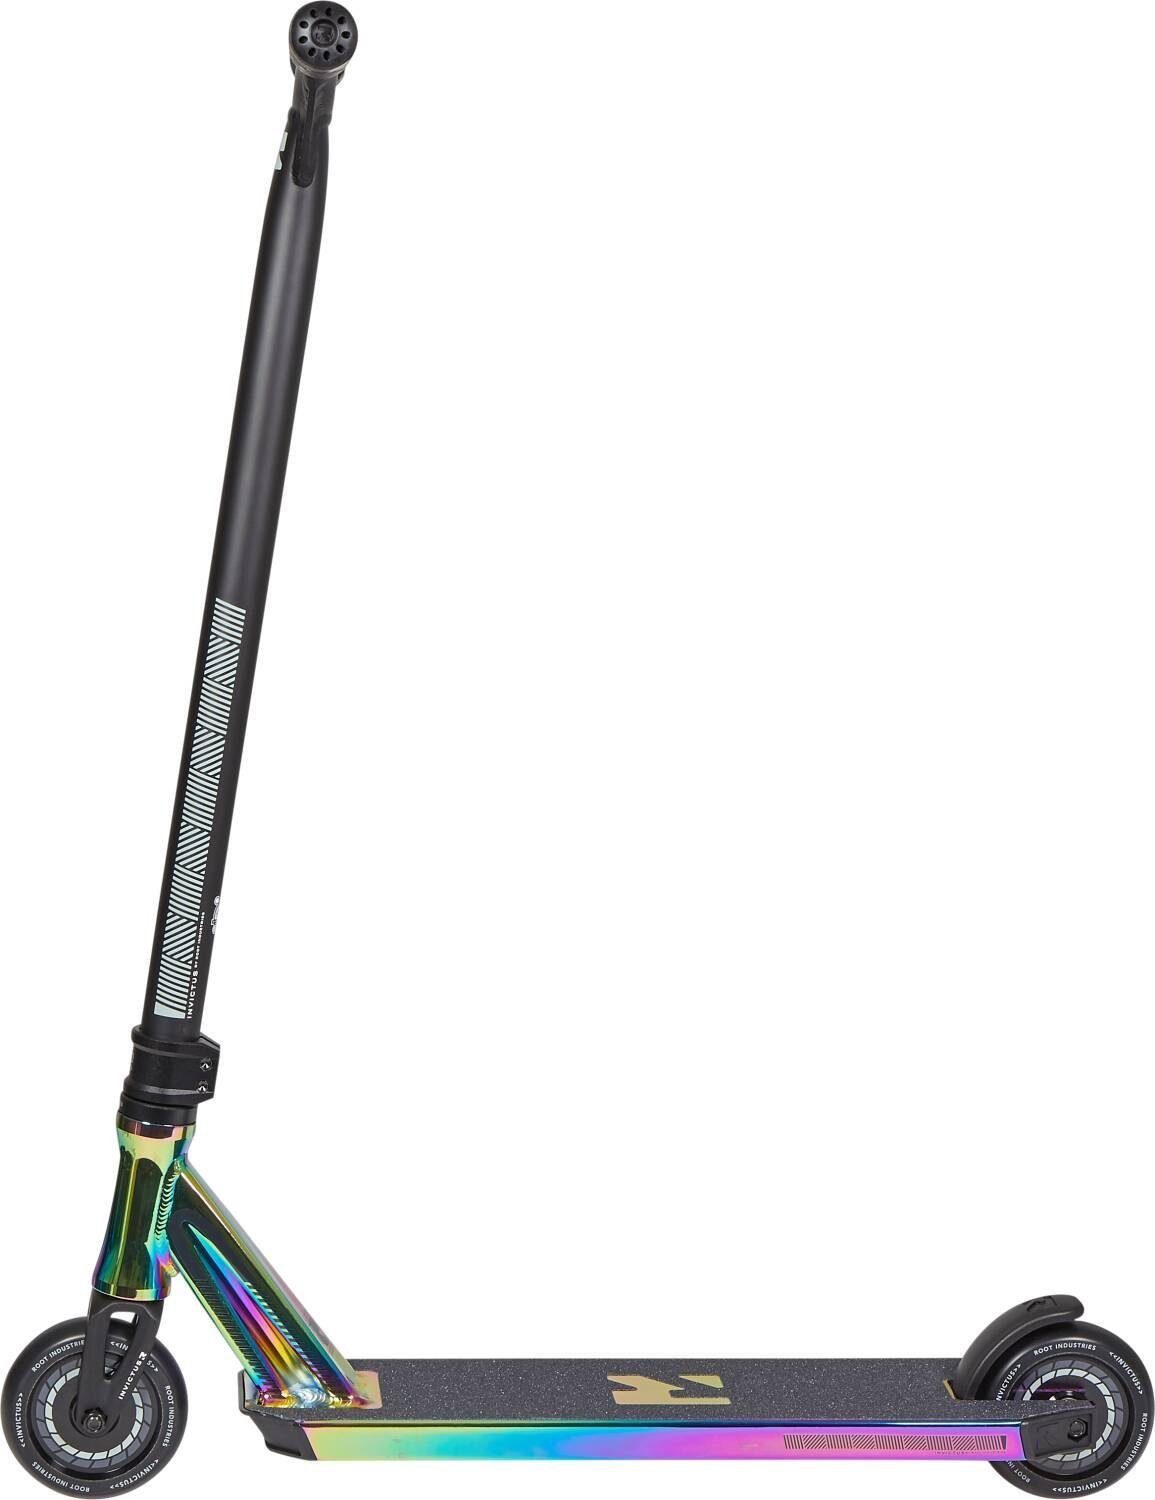 Stuntscooter Industries Invictus Industries Root neochrom Stunt-Scooter Root H=85cm